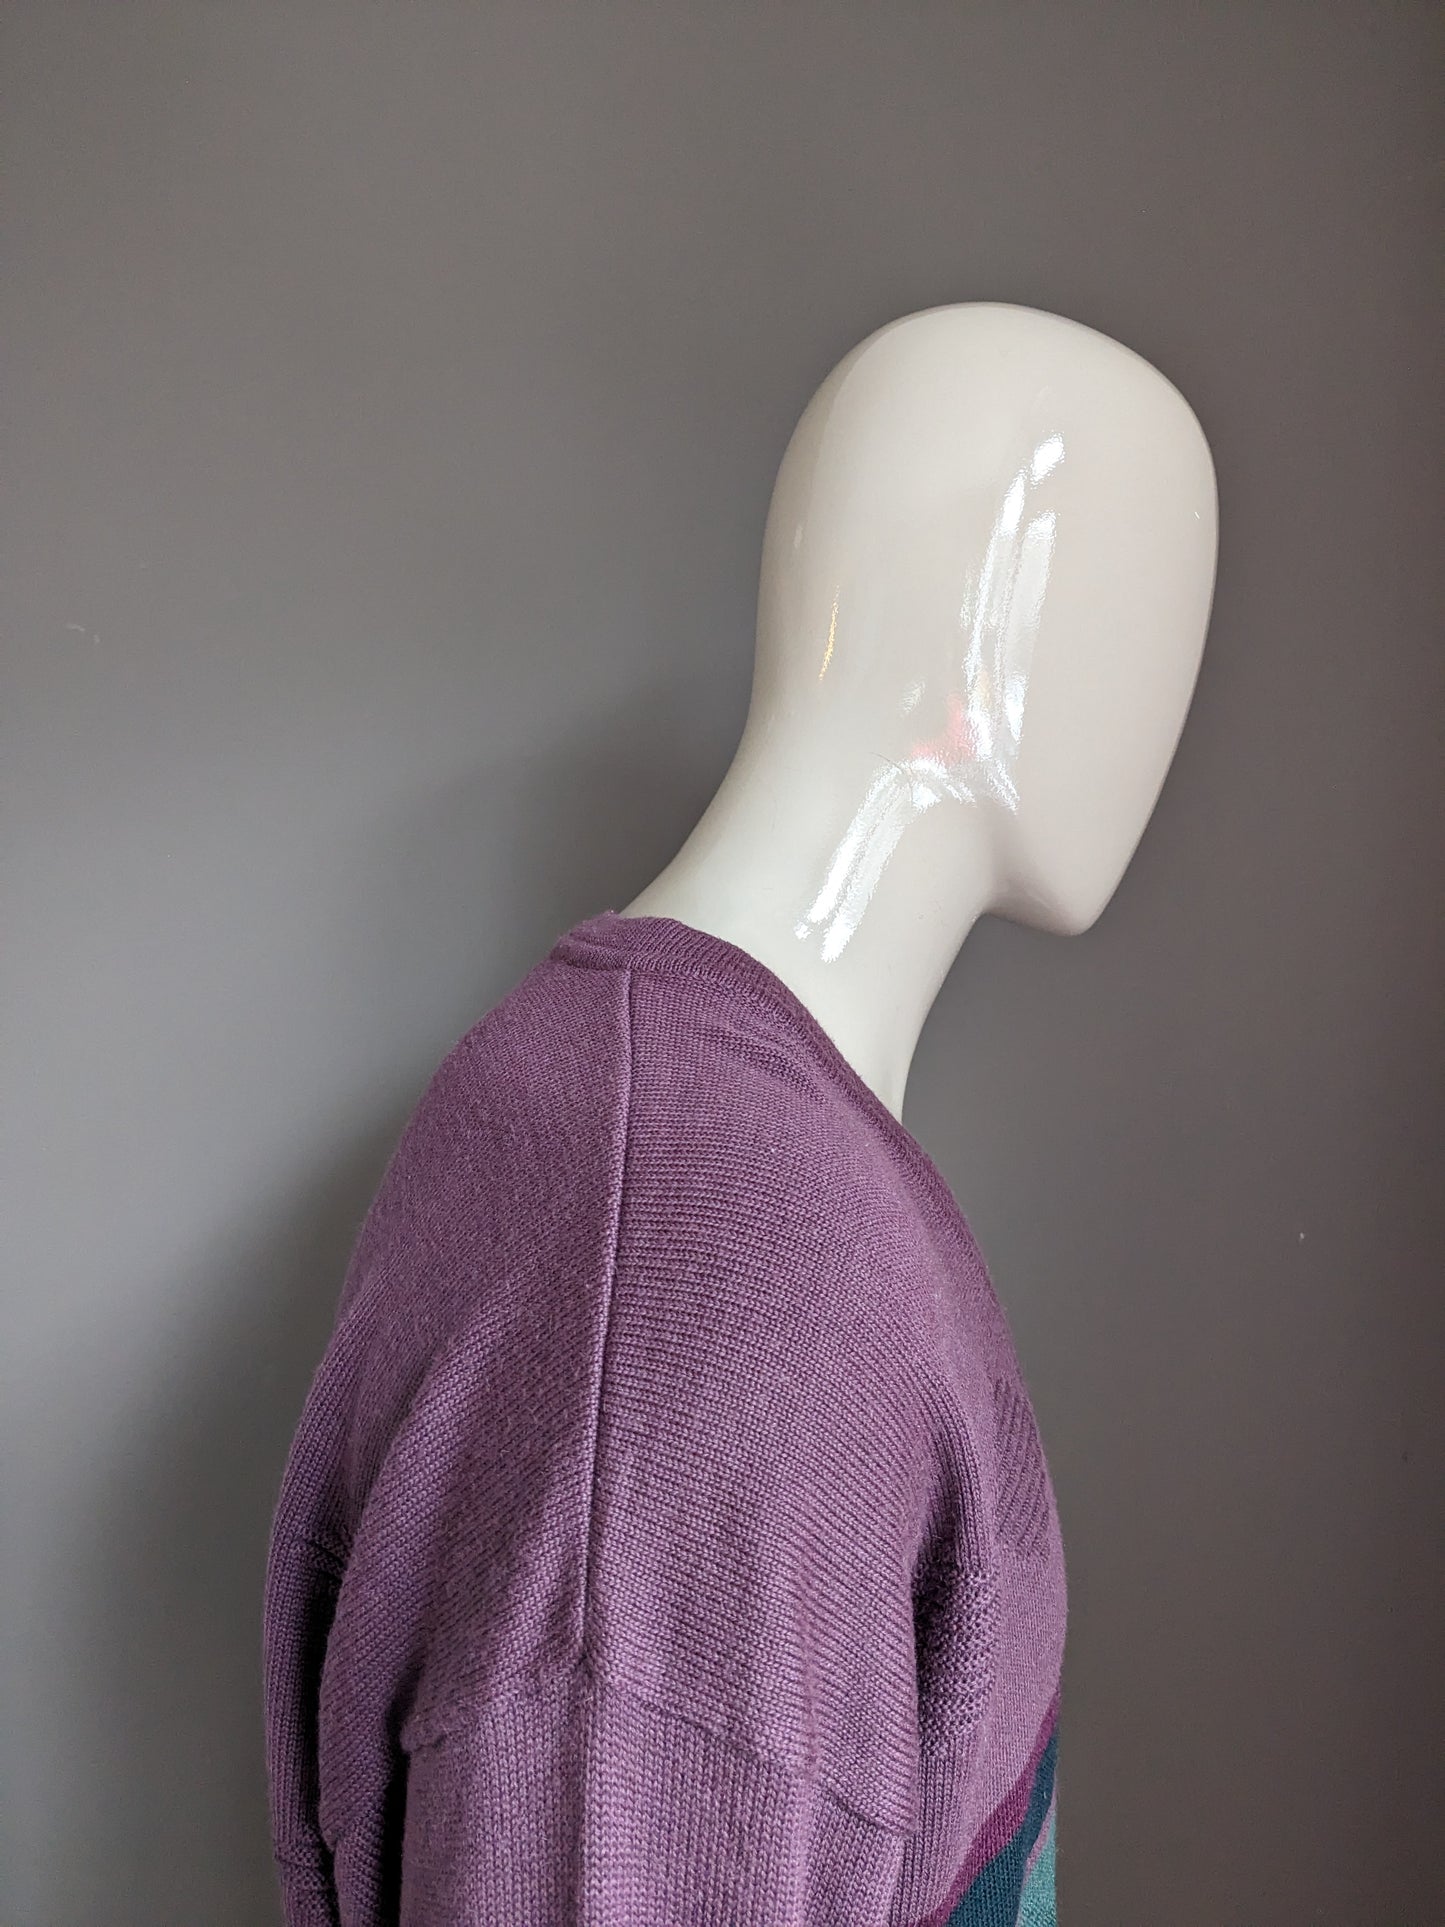 Vintage Sunny woolen sweater with v-neck. Purple green colored. Size XL. 50% wool.